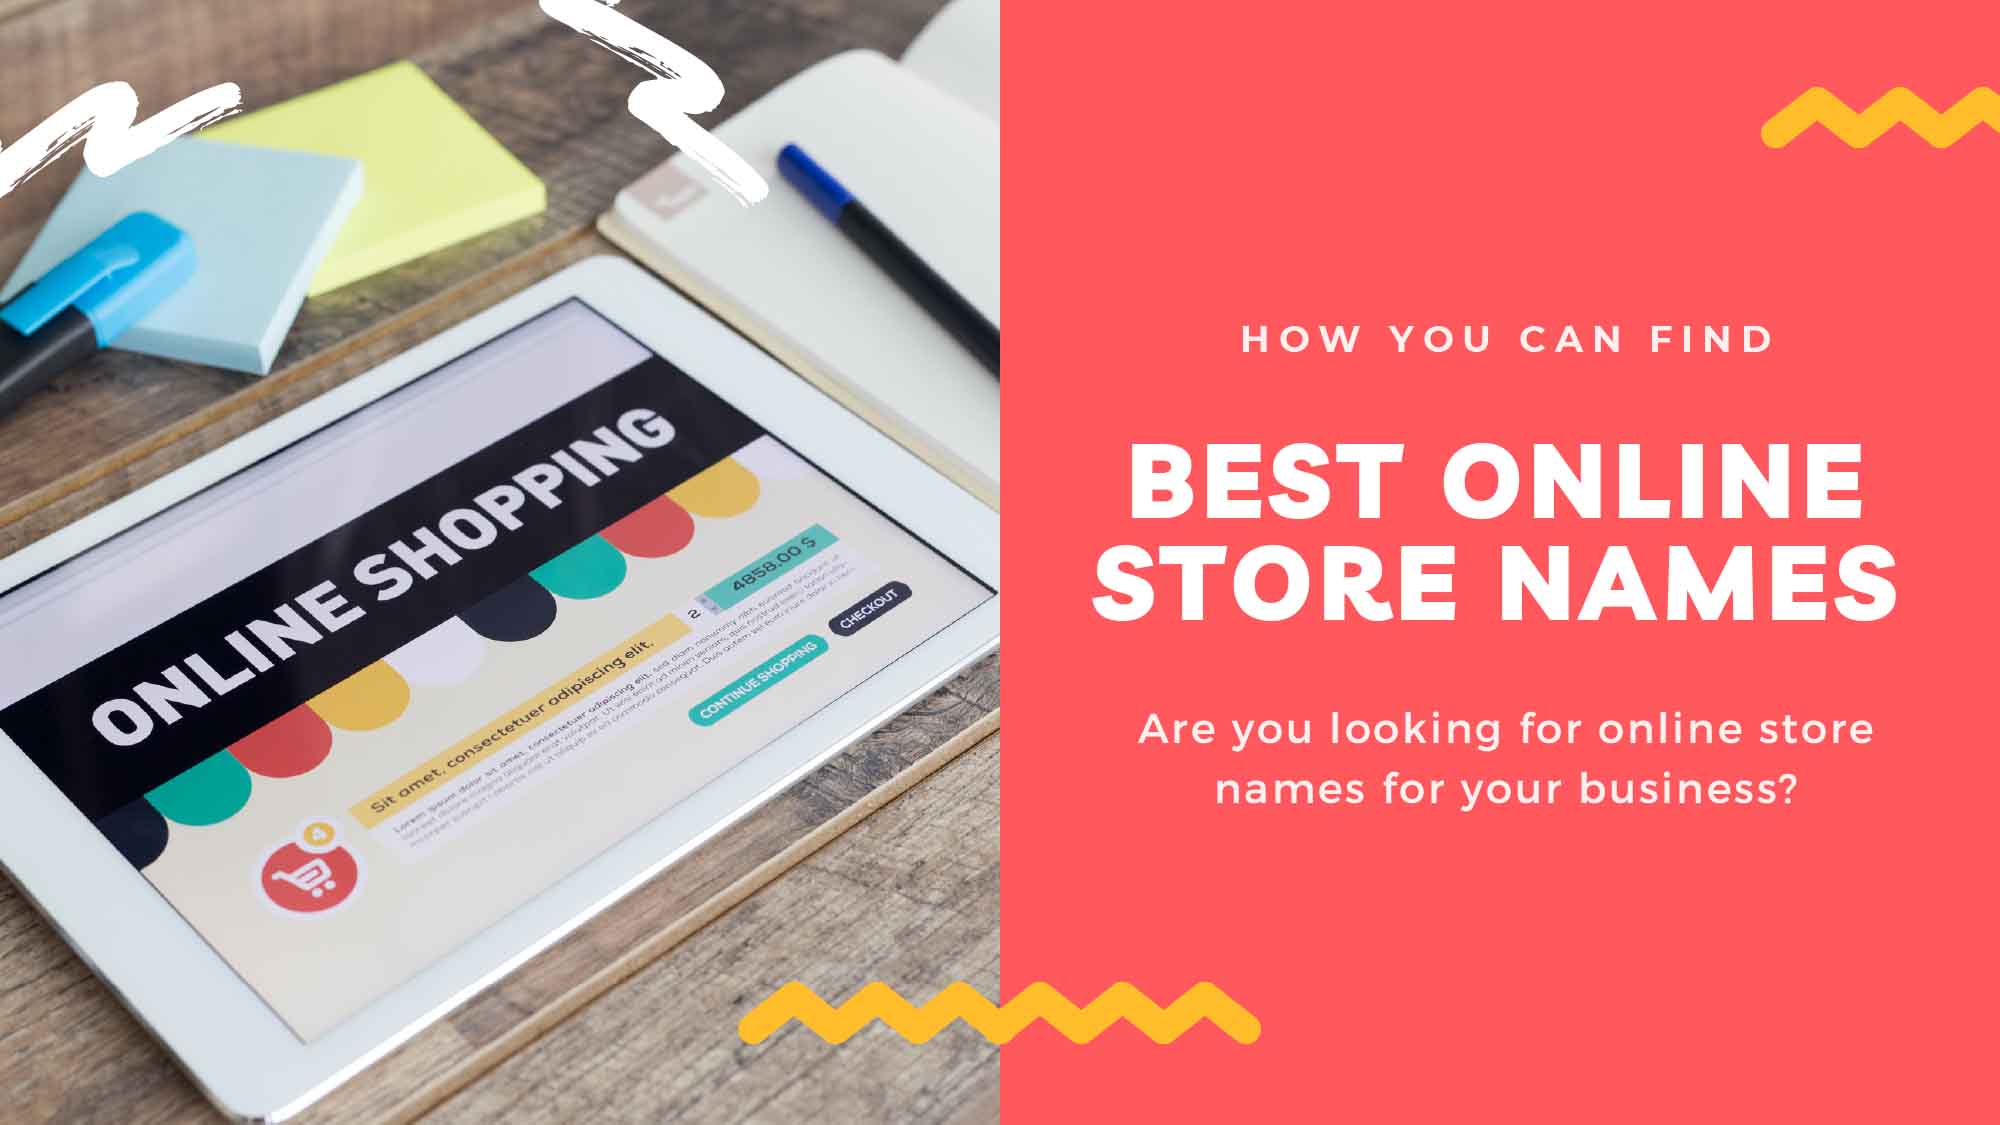 Here Is How You Can Find The Best Online Store Names!